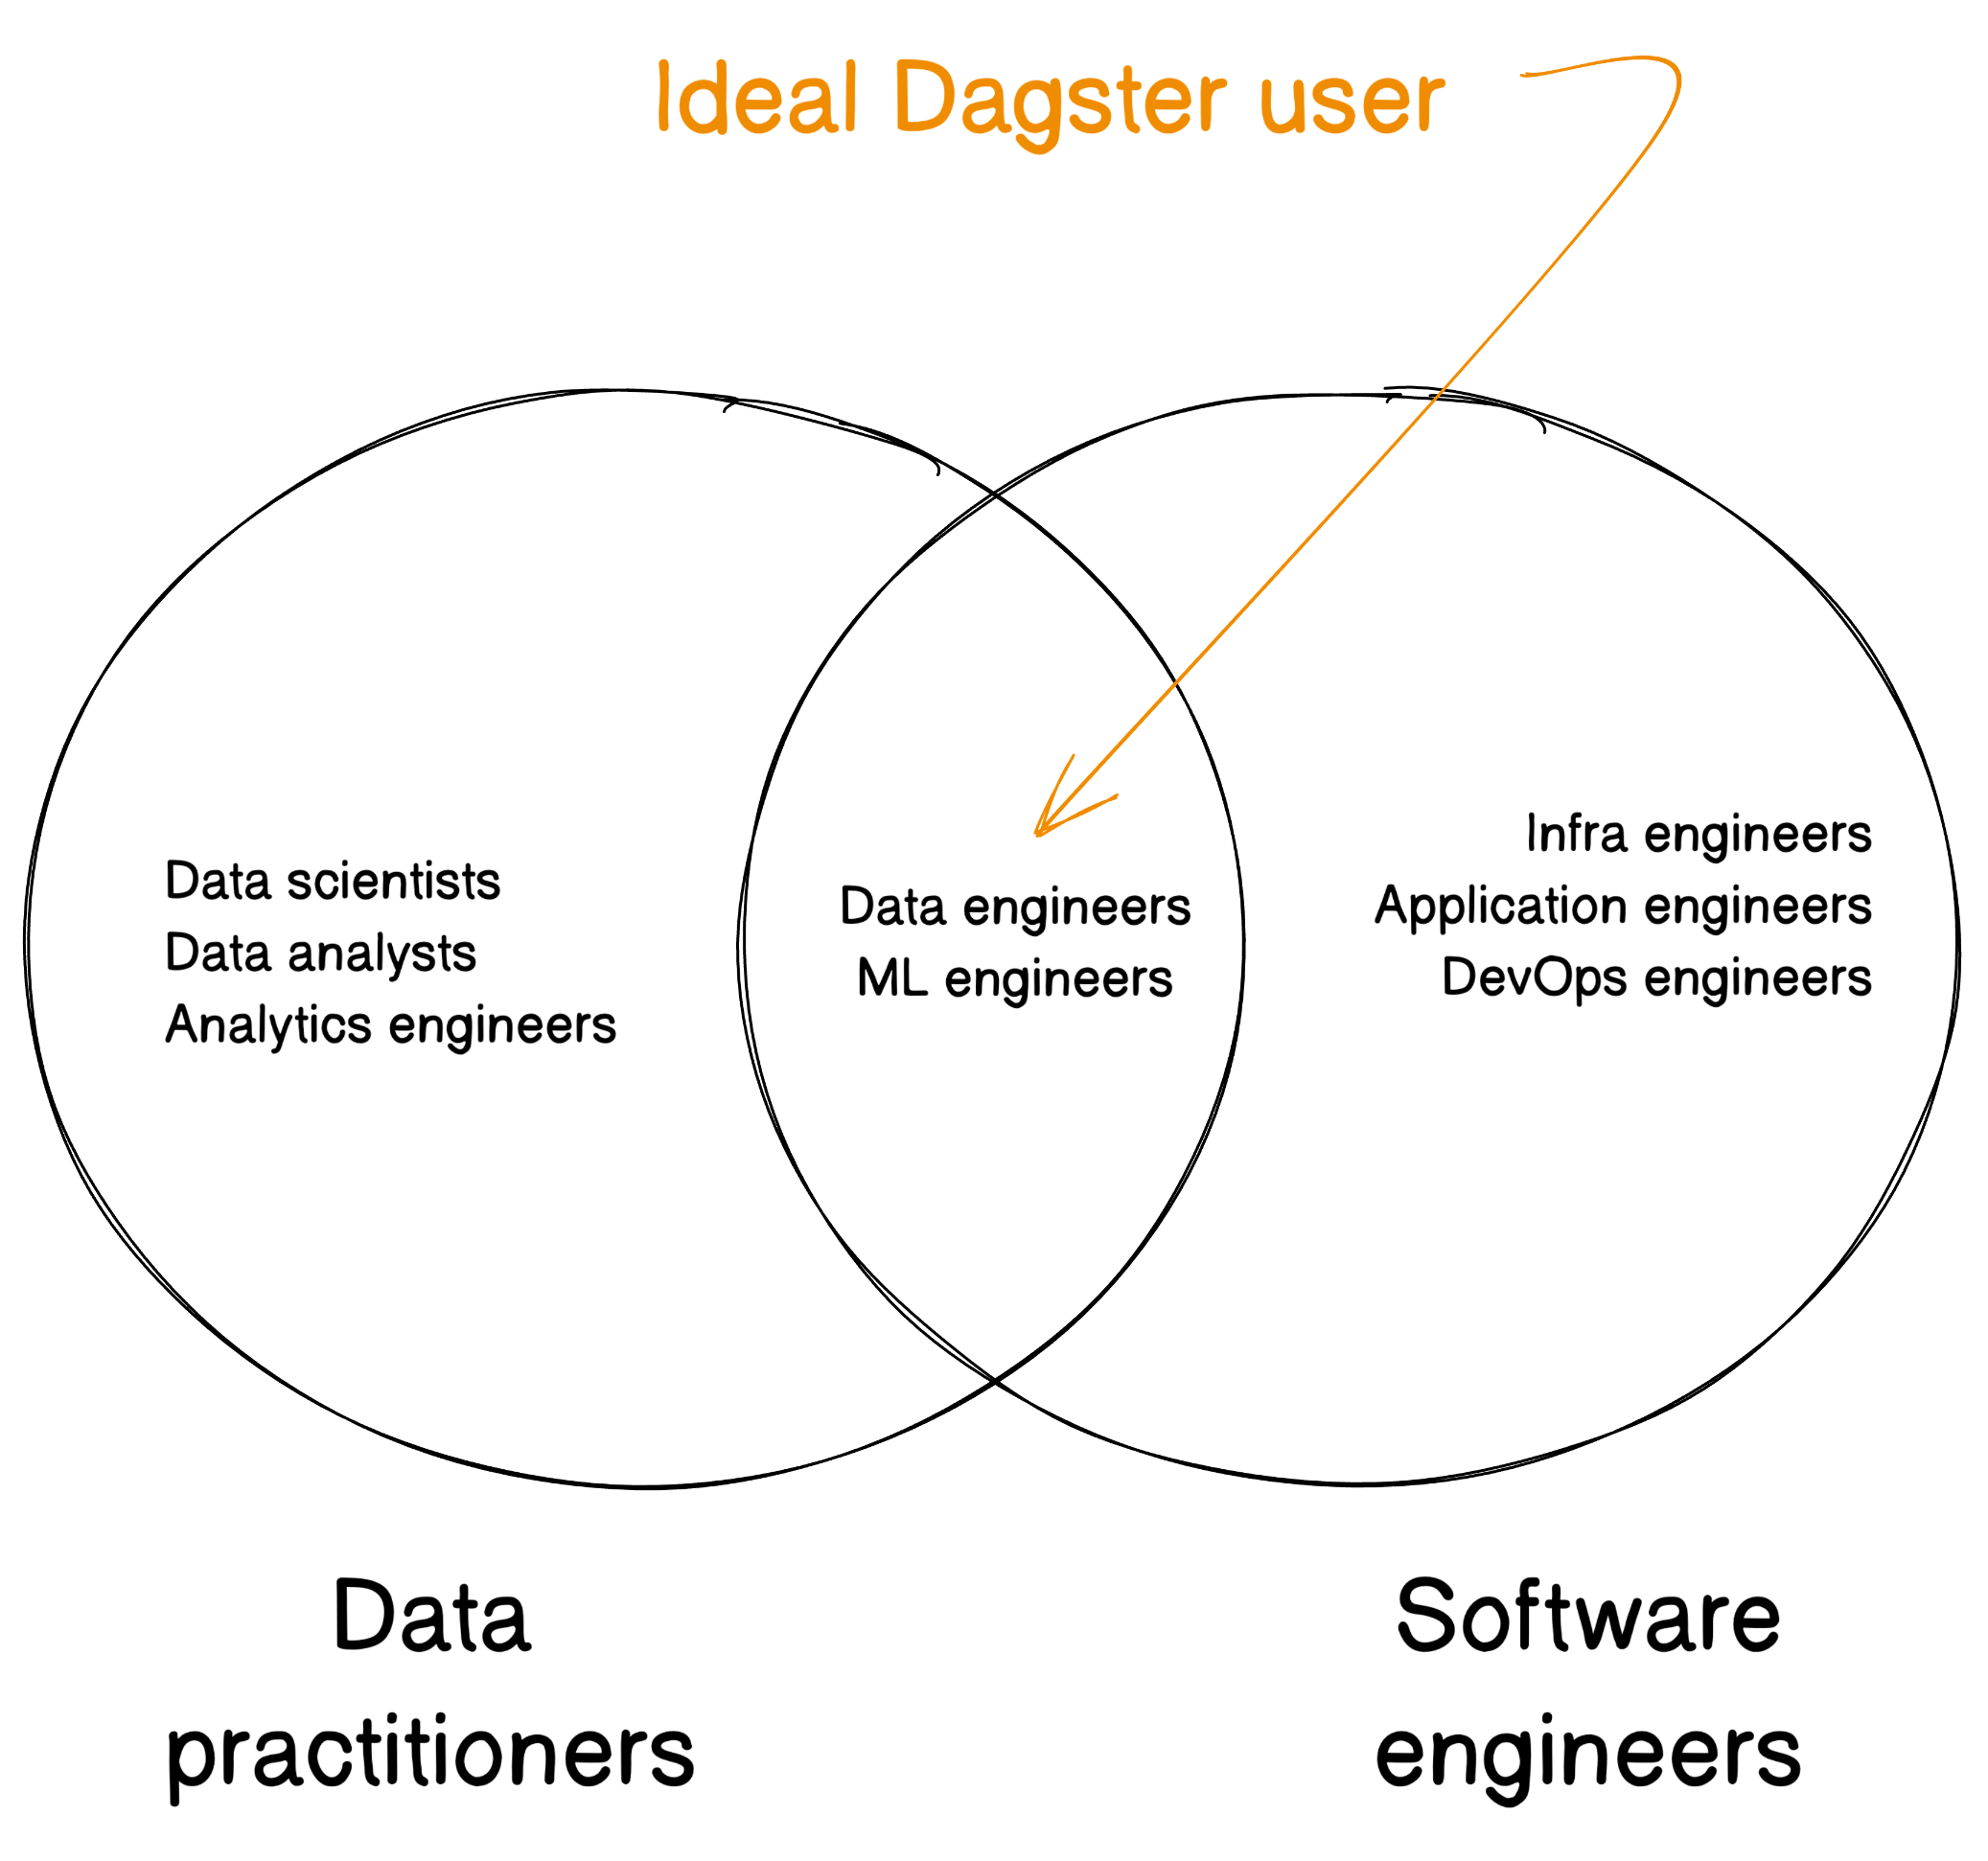 An illiustration of the Dagster ideal user at the intersection of data practitioners and software engineering.